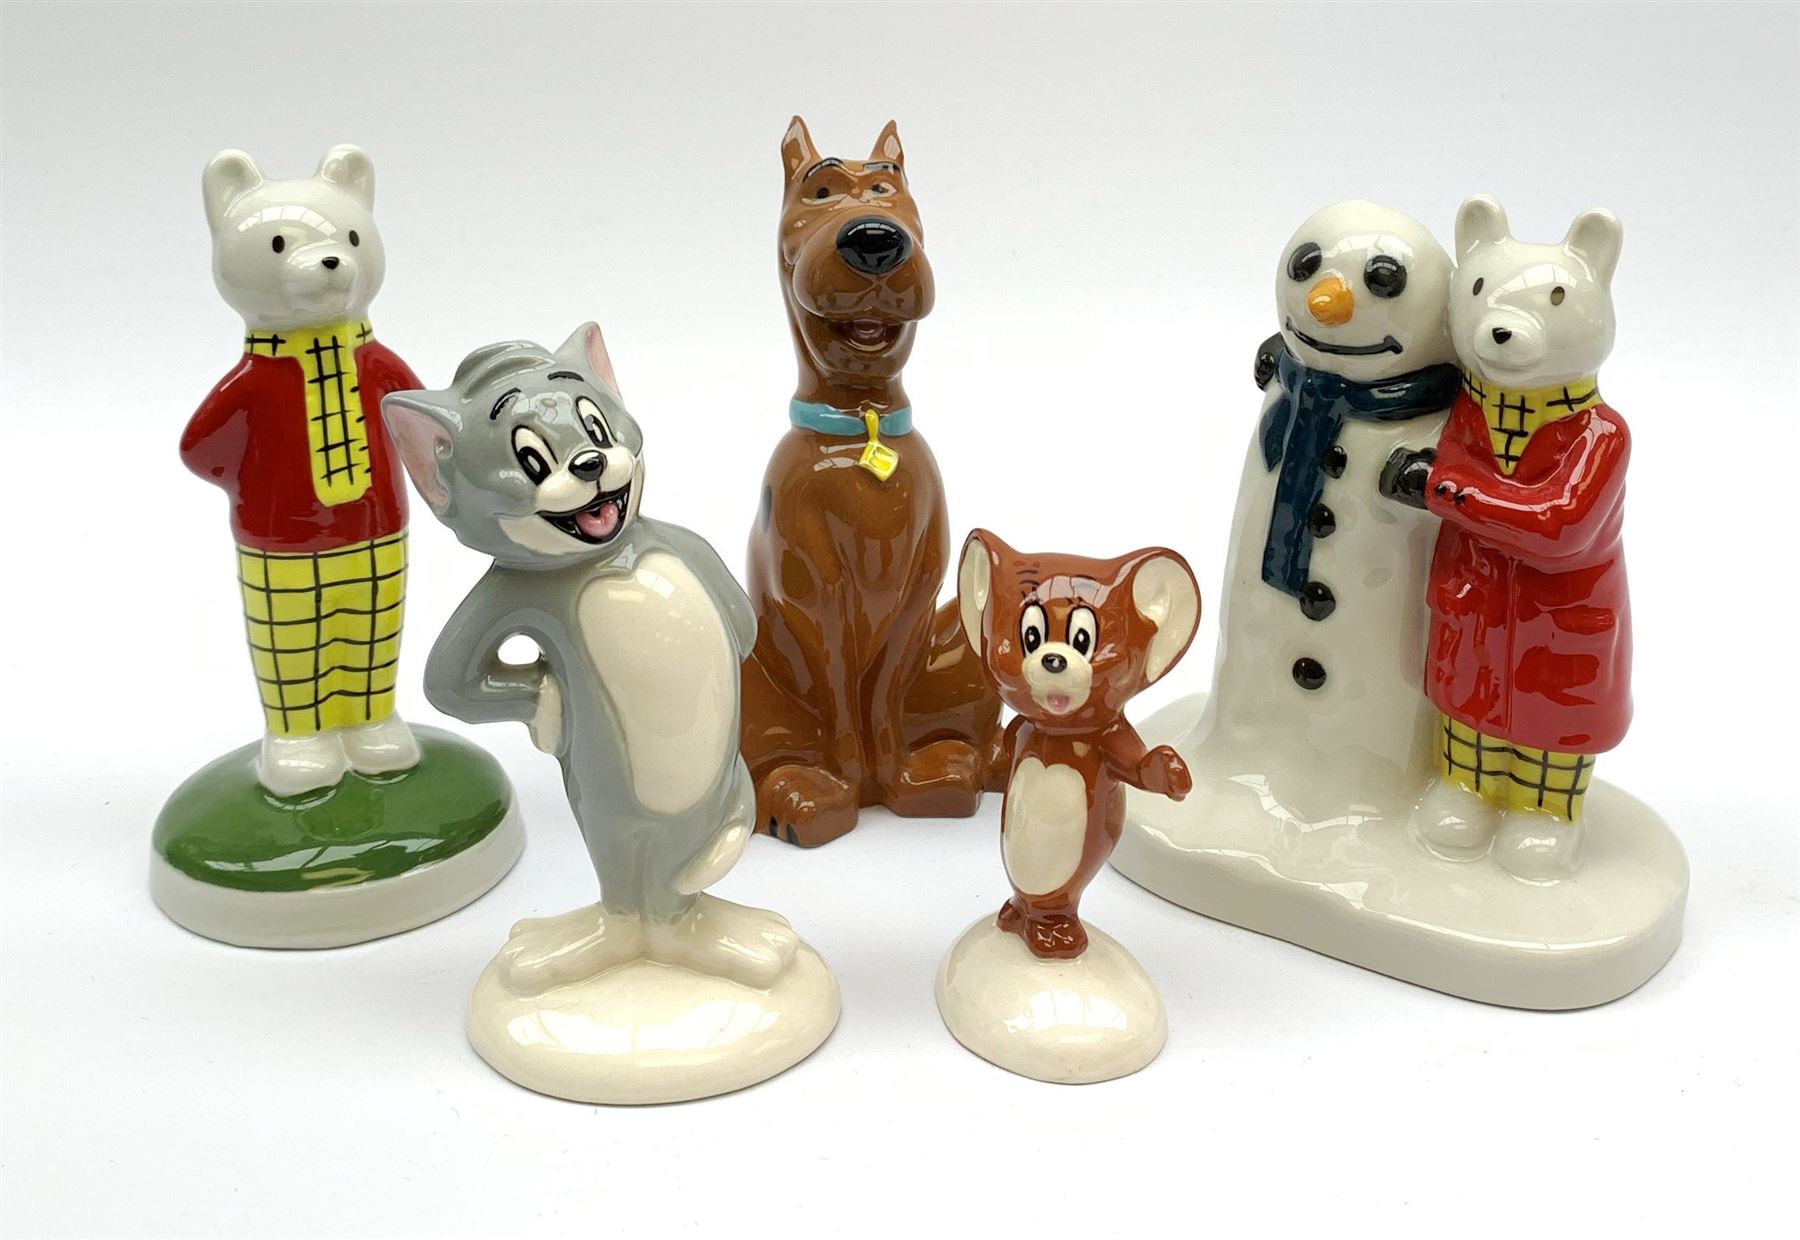 Two limited edition Beswick figures